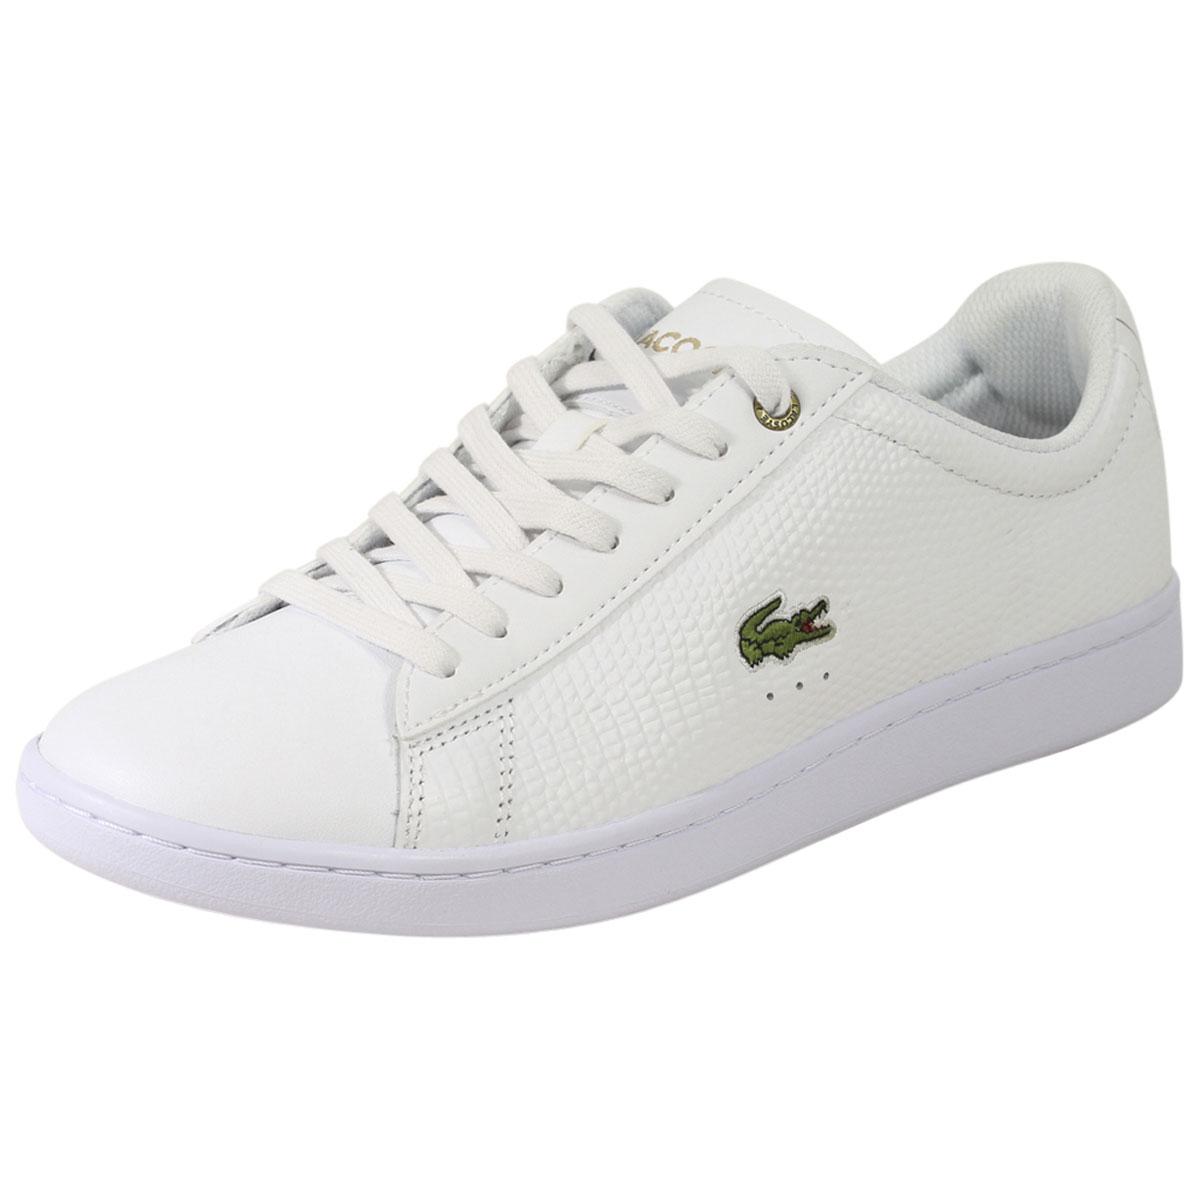 Lacoste Men's Carnaby EVO 118 Trainers Sneakers Shoes - White/Light Tan - 12 D(M) US